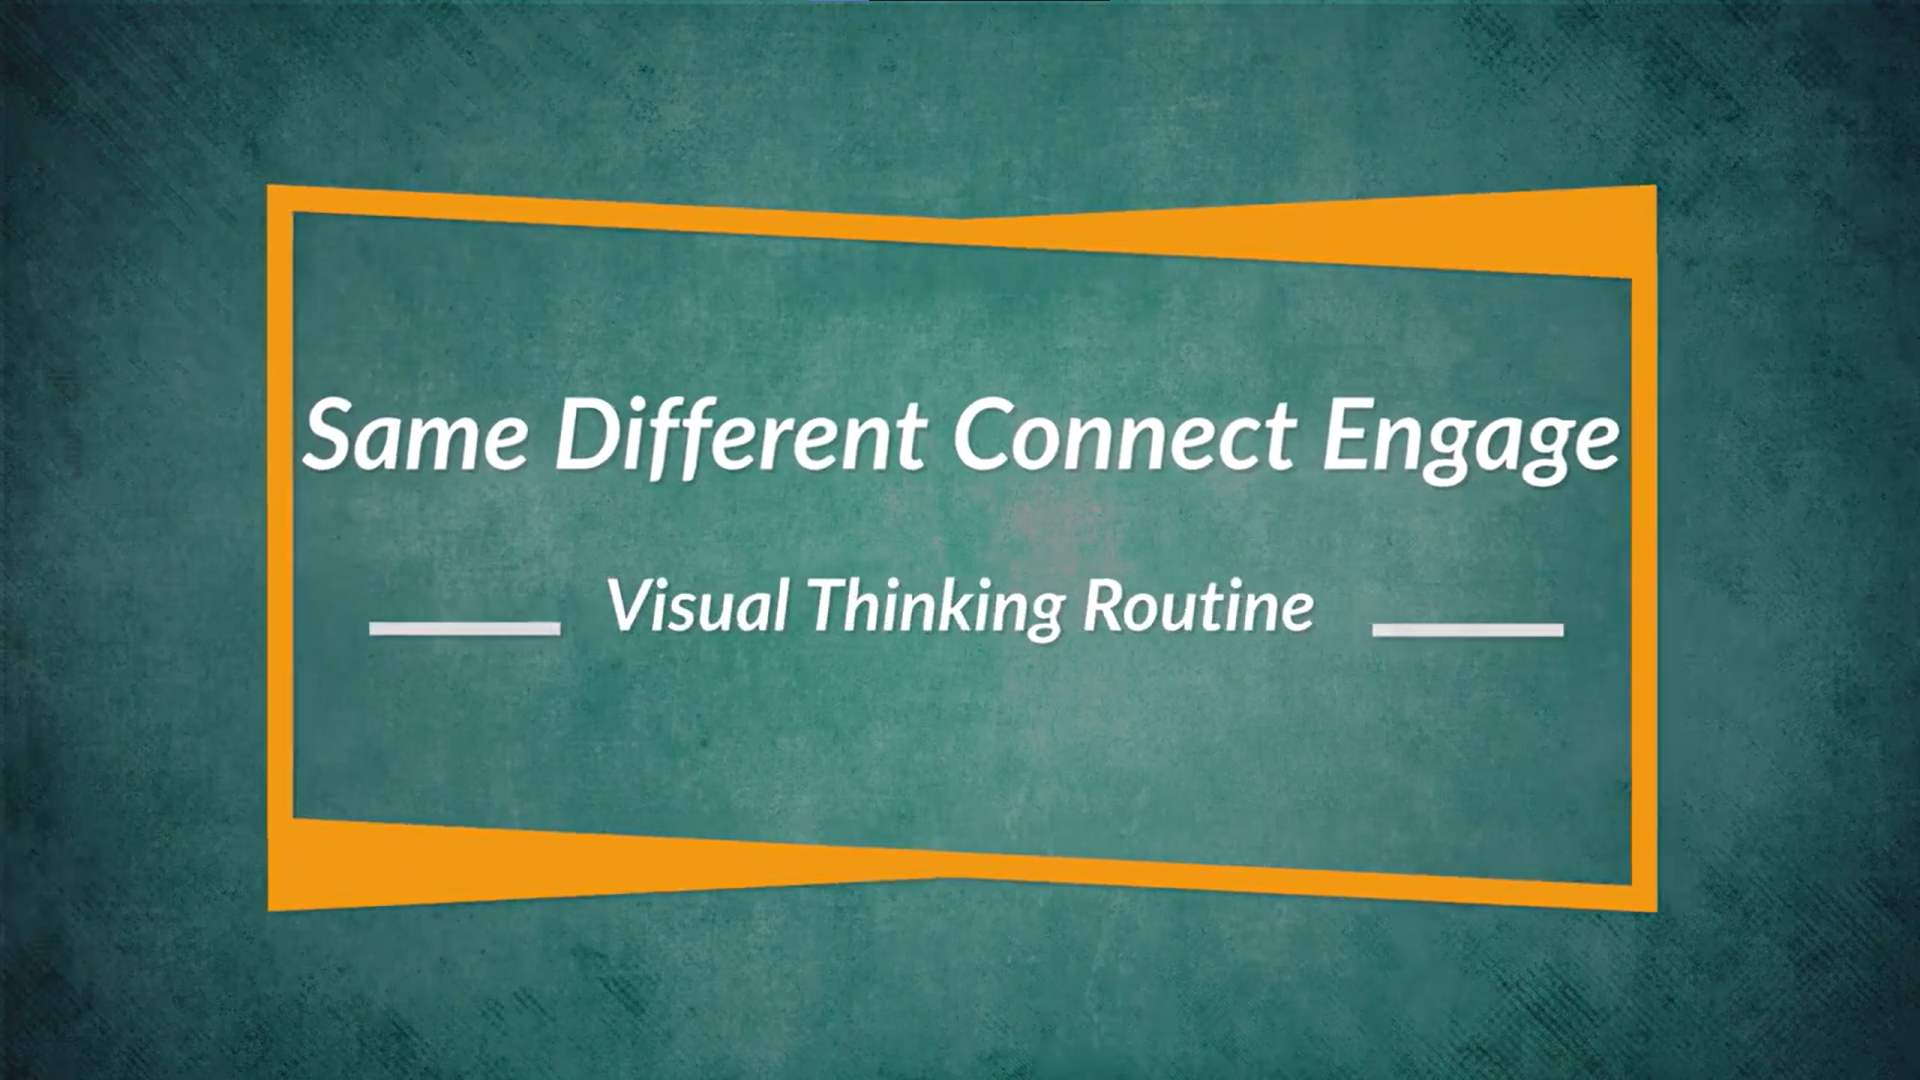 Cover image for the "Same, Different, Connect, Engage" Visual Thinking Strategy